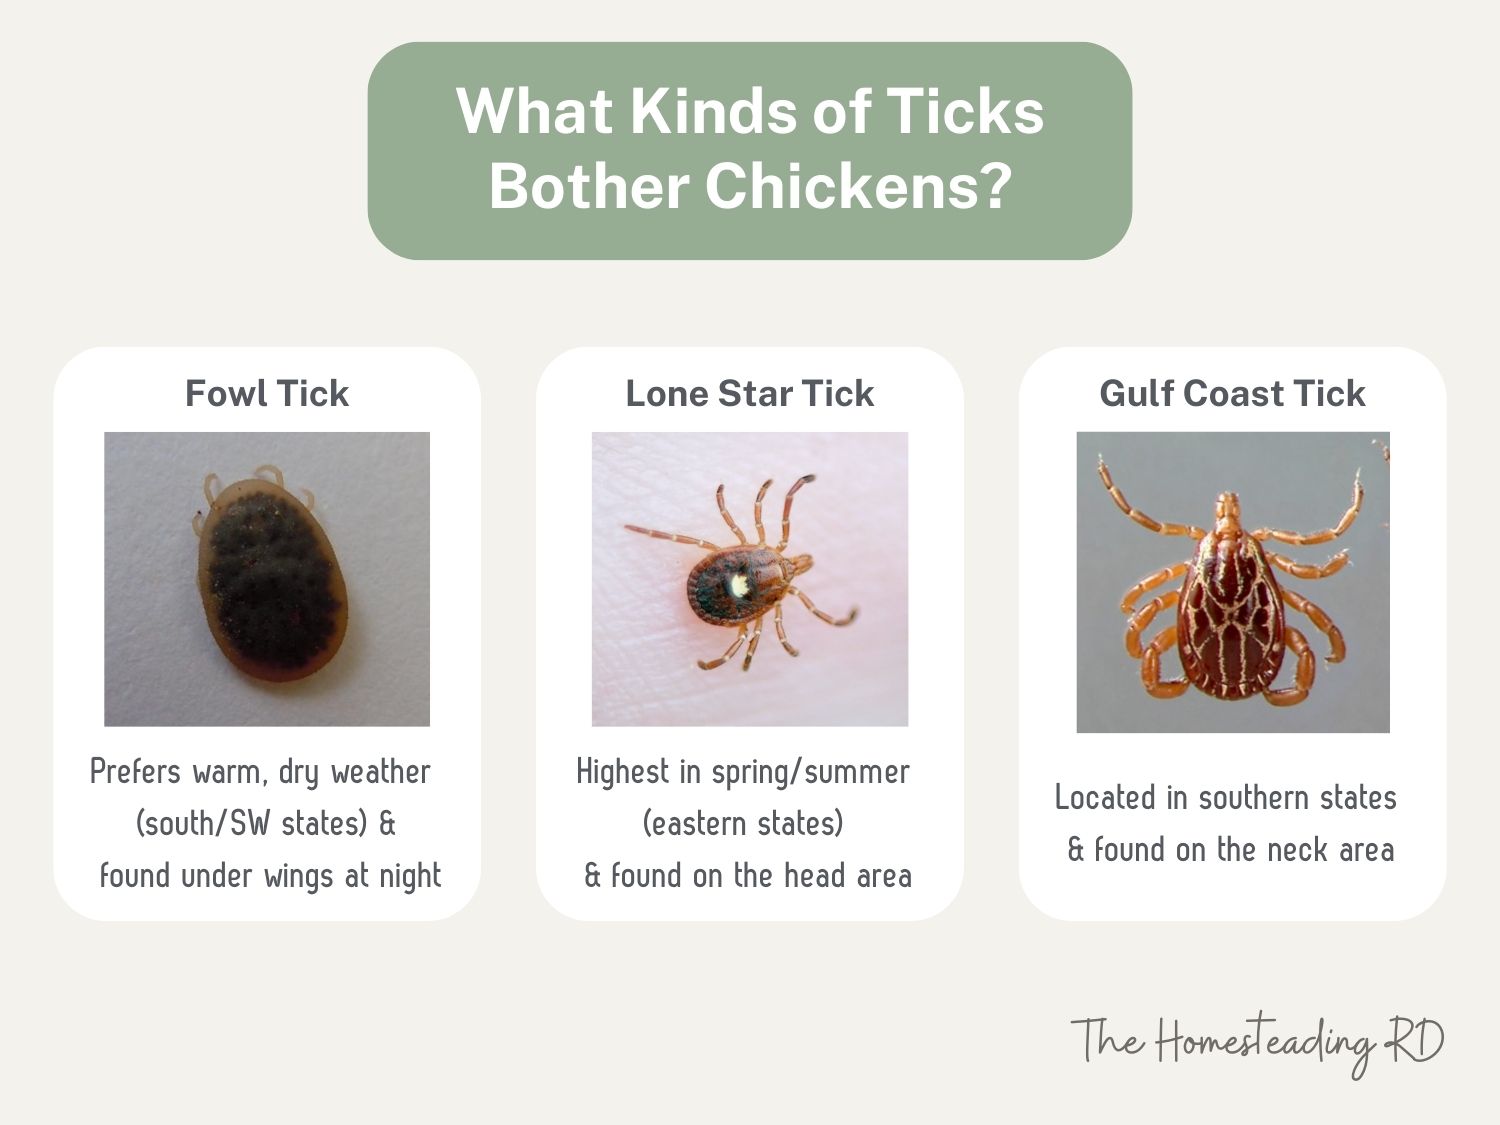 A chart showing the 3 kinds of ticks that can affect chickens.